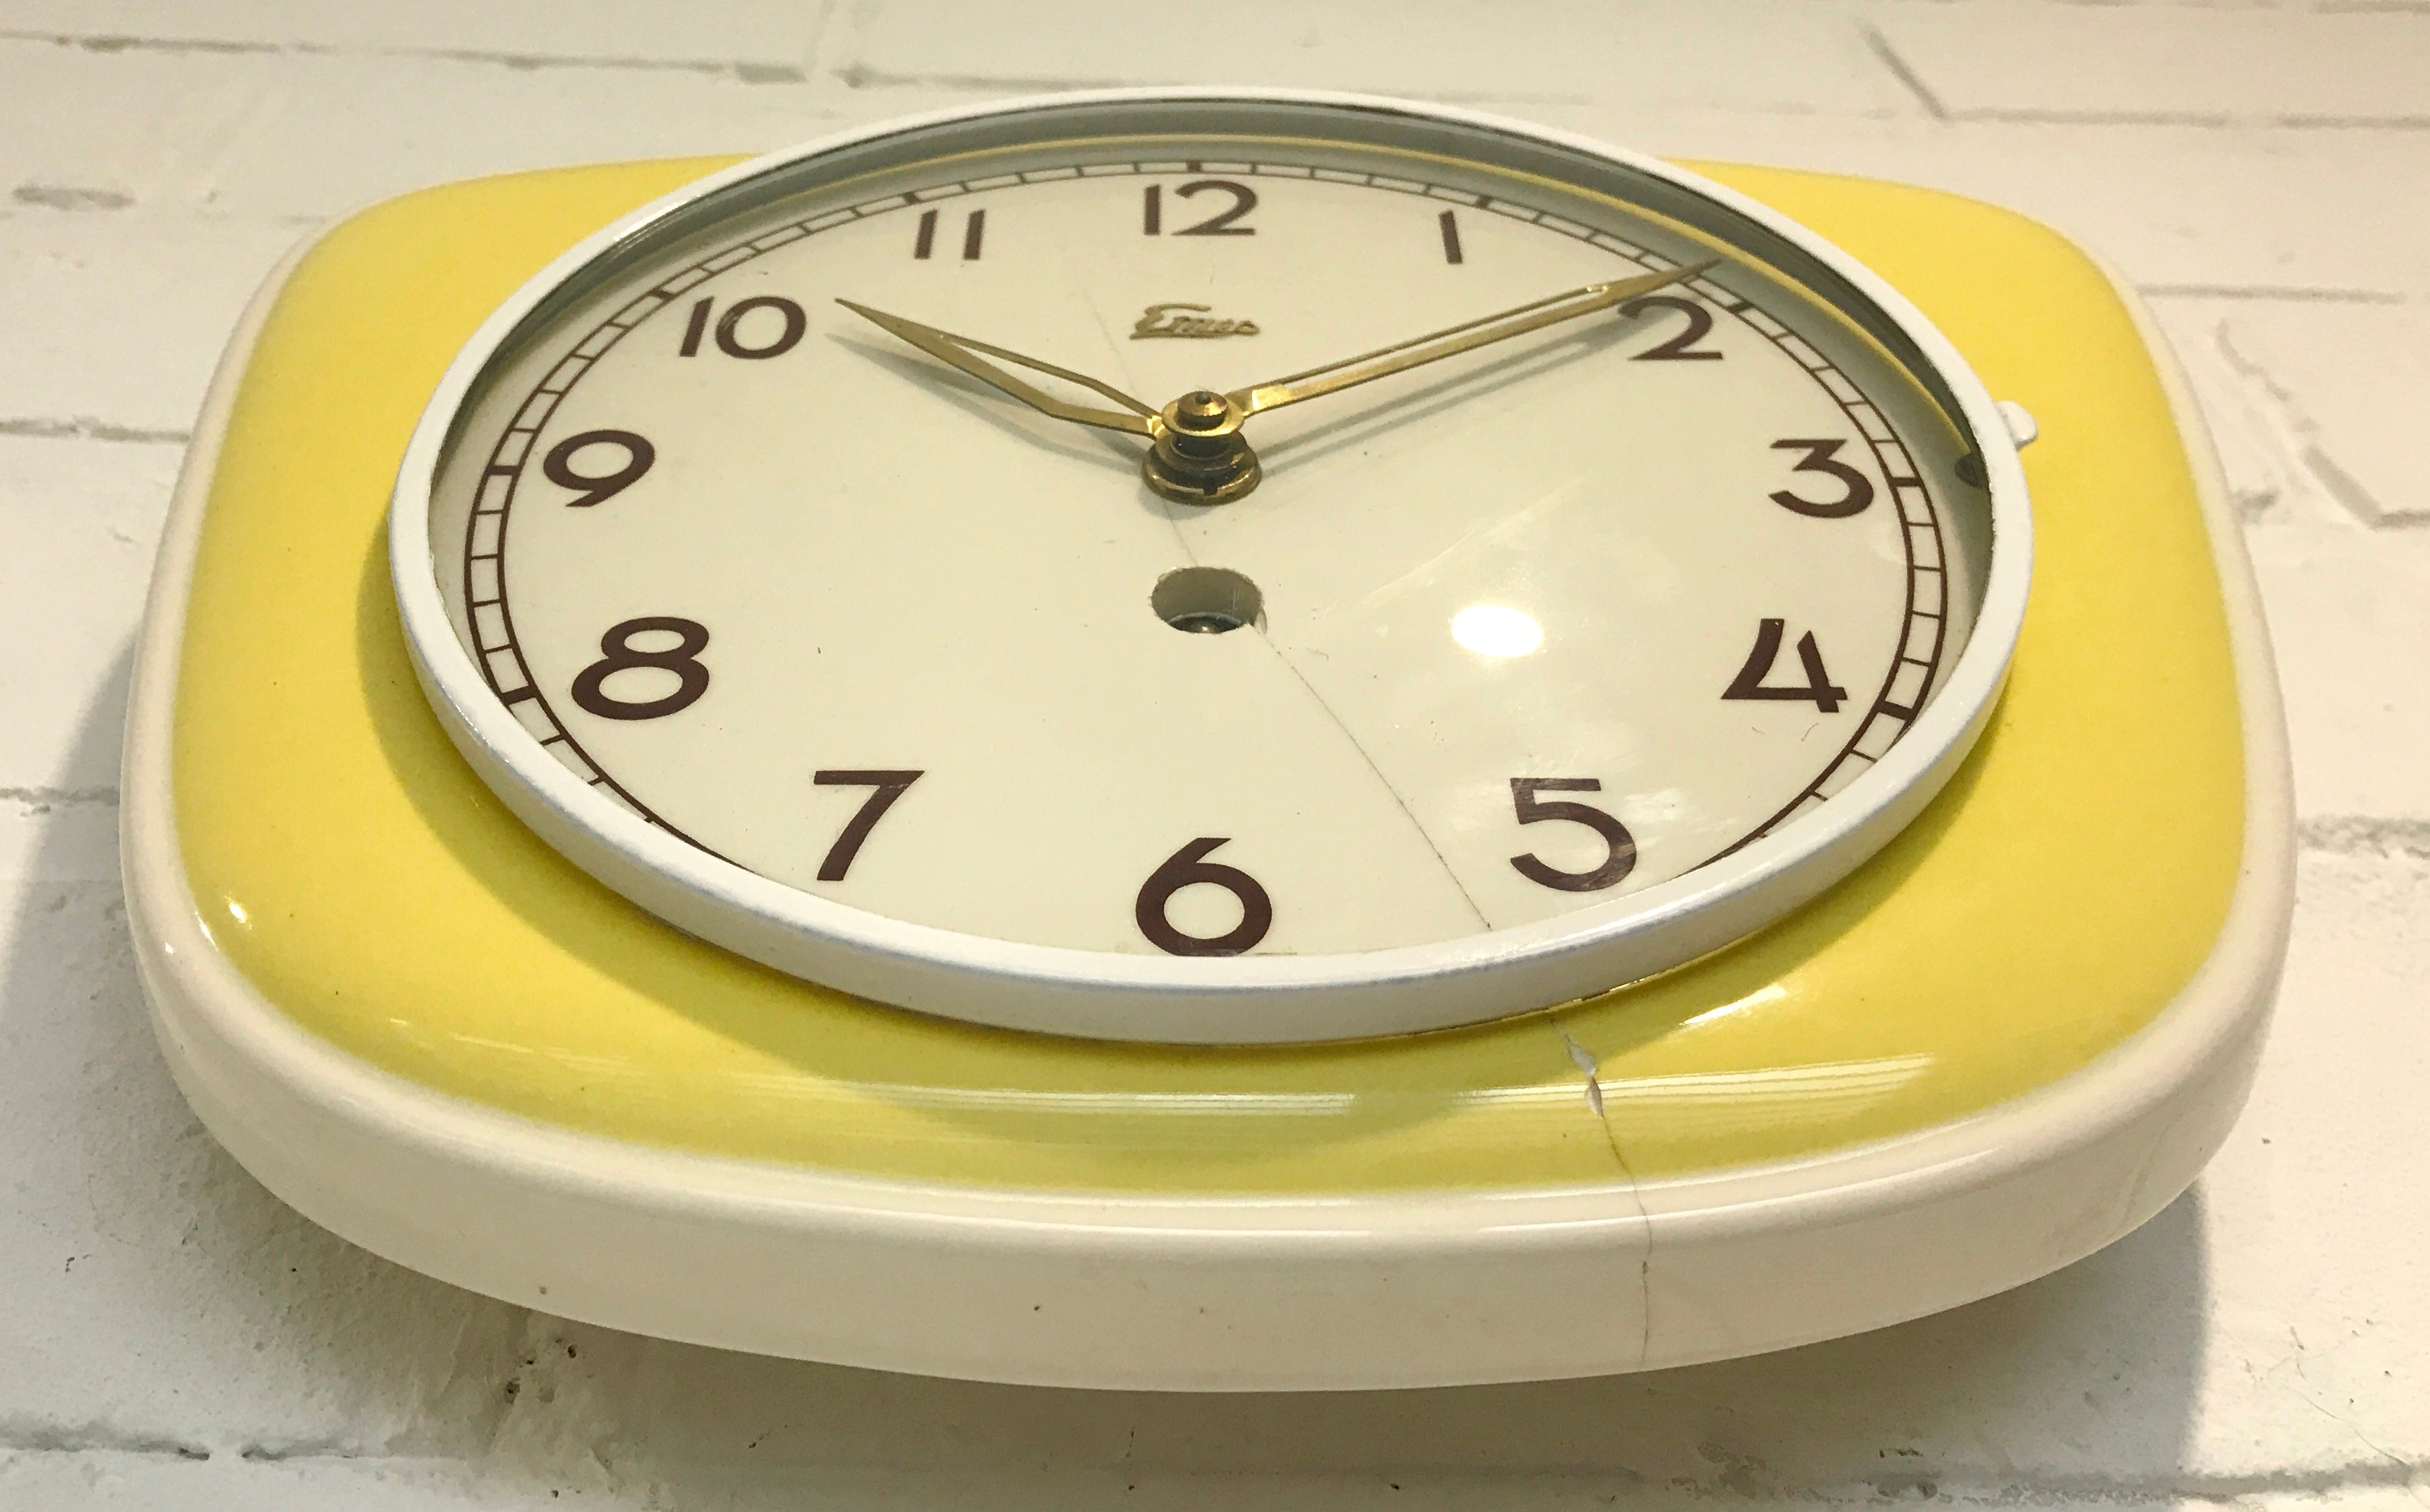 Vintage EMES Ceramic Wall Clock | eXibit collection